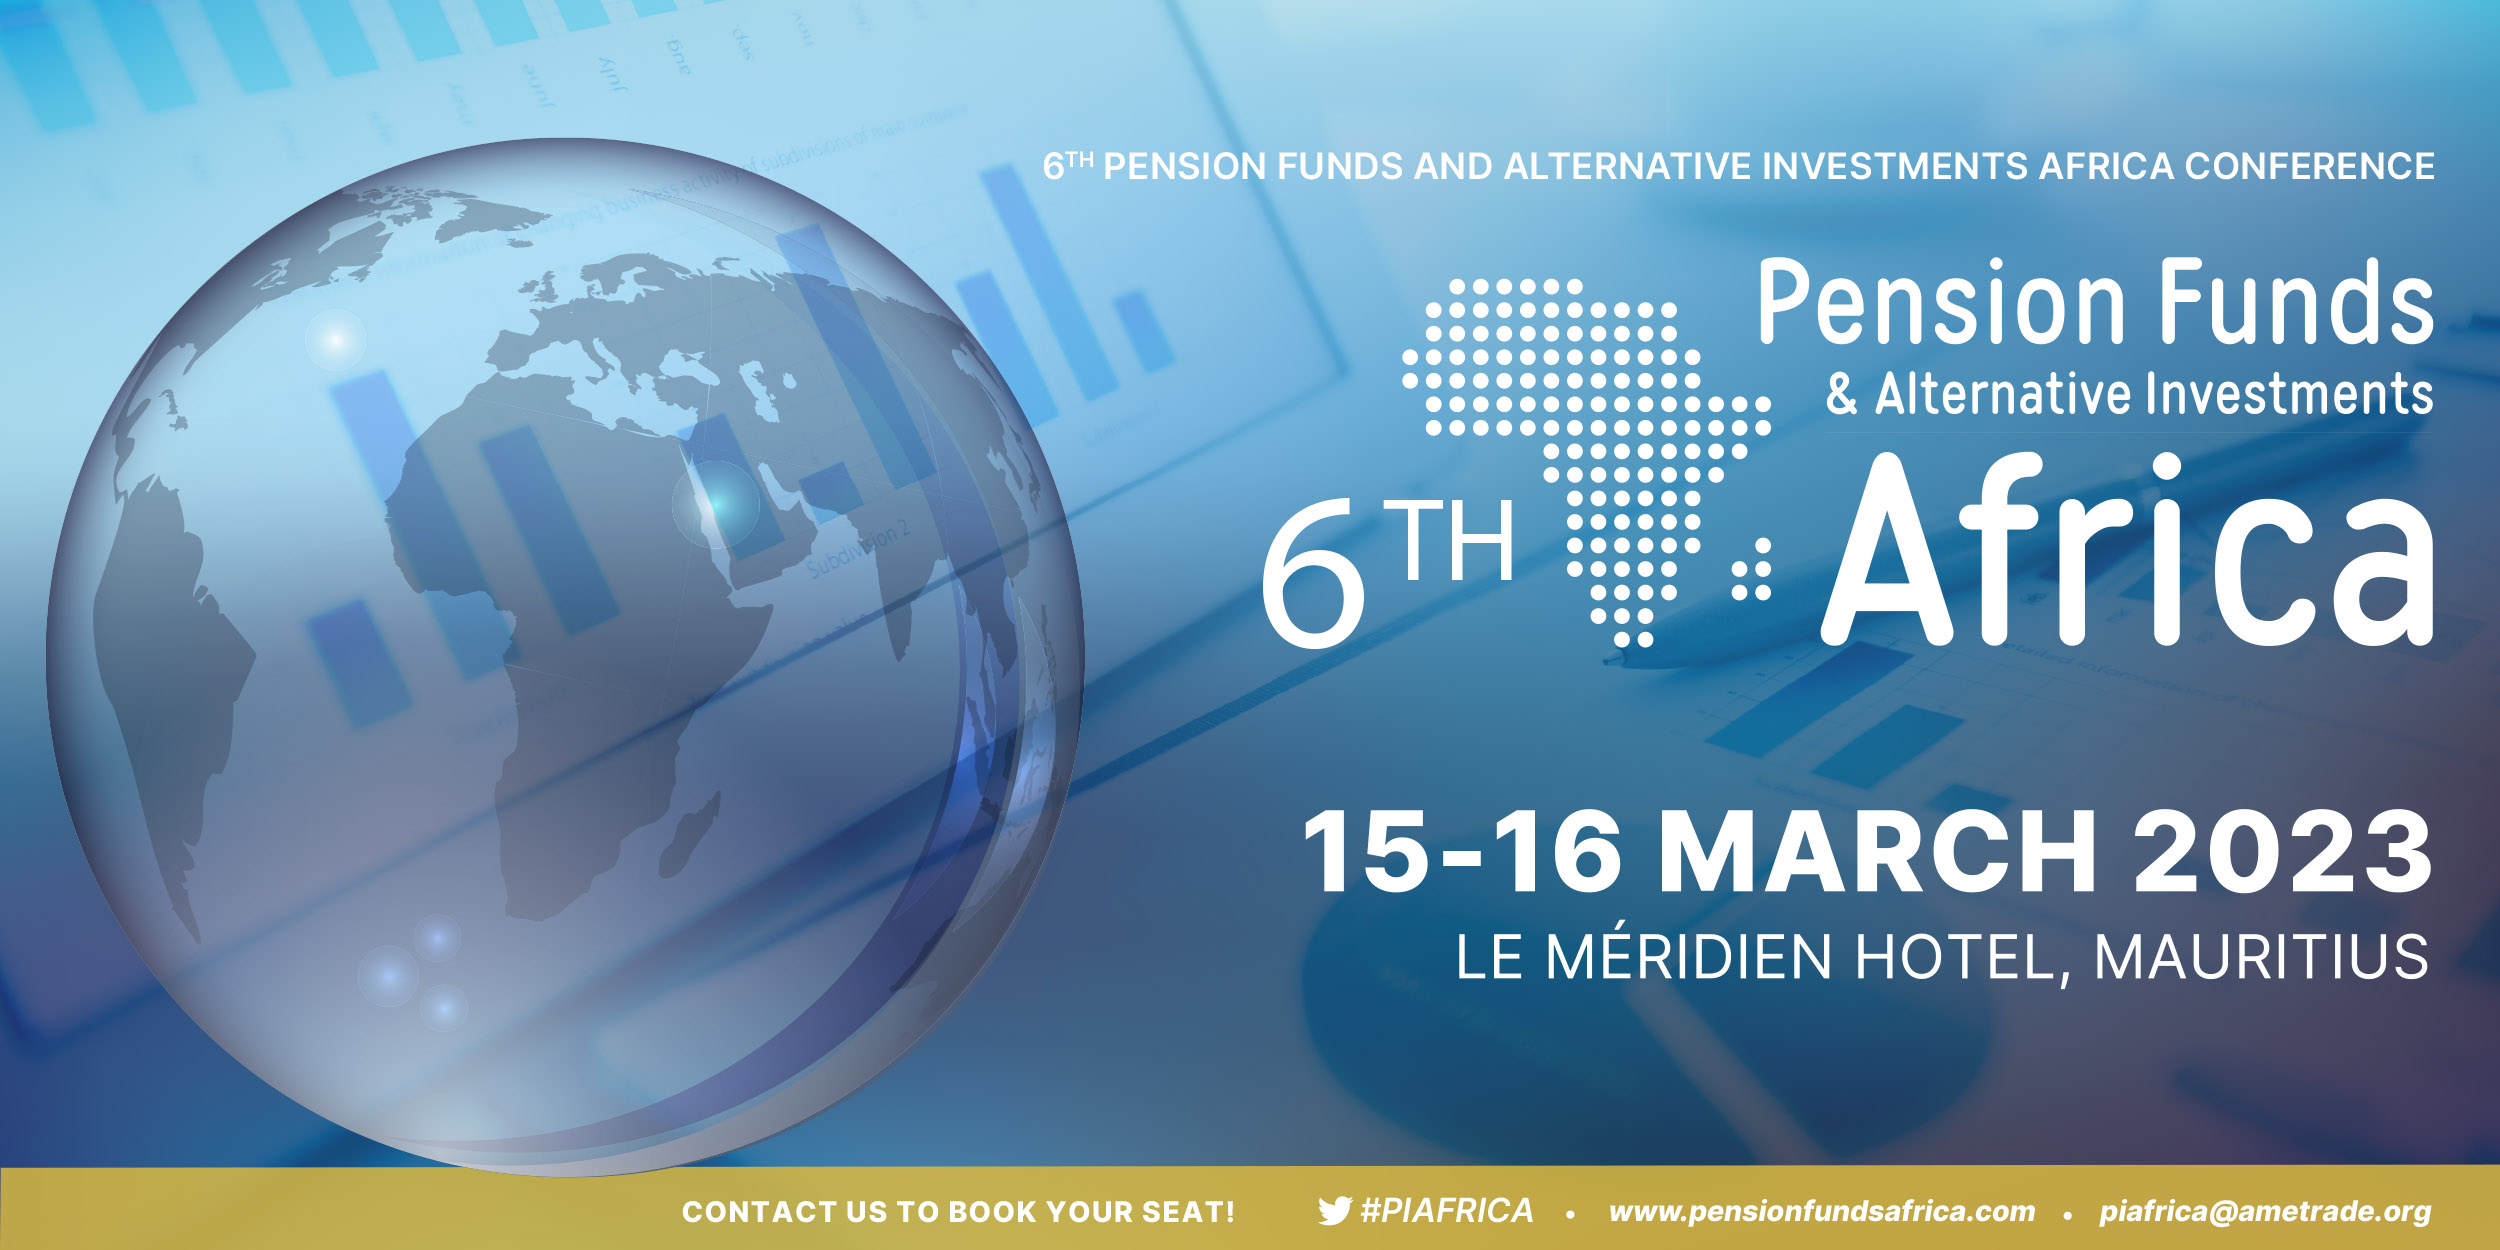 Pension Funds and Alternative Investments Africa Conference, Balaclava, Mauritius